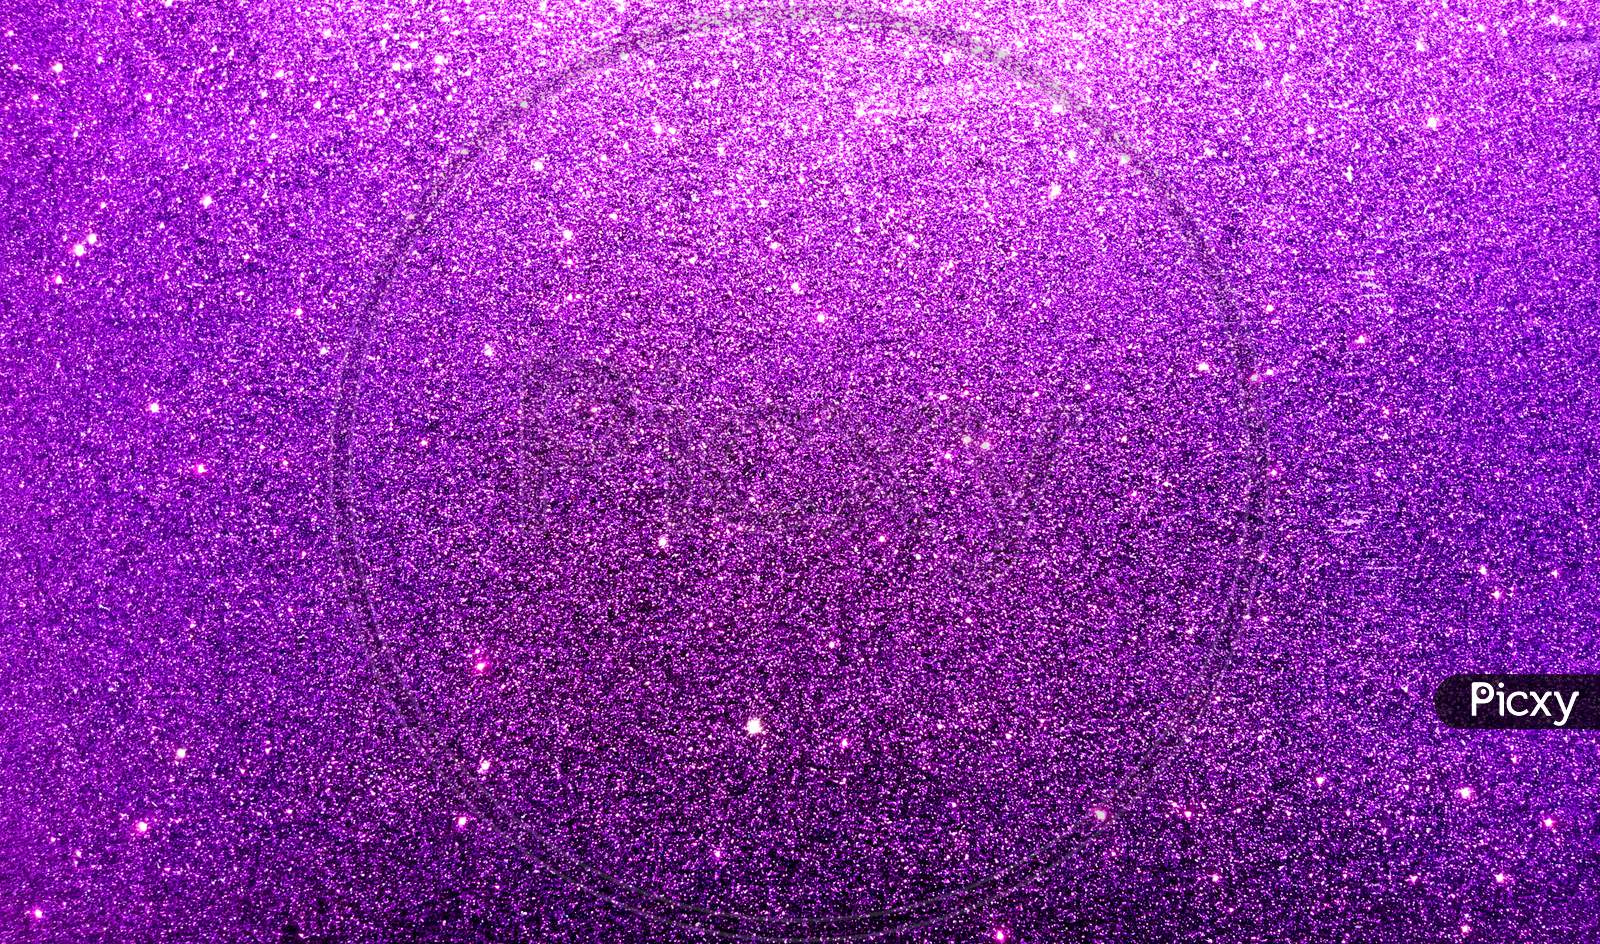 Purple abstract glitter textured background. grunge distorted decay texture background wallpaper.